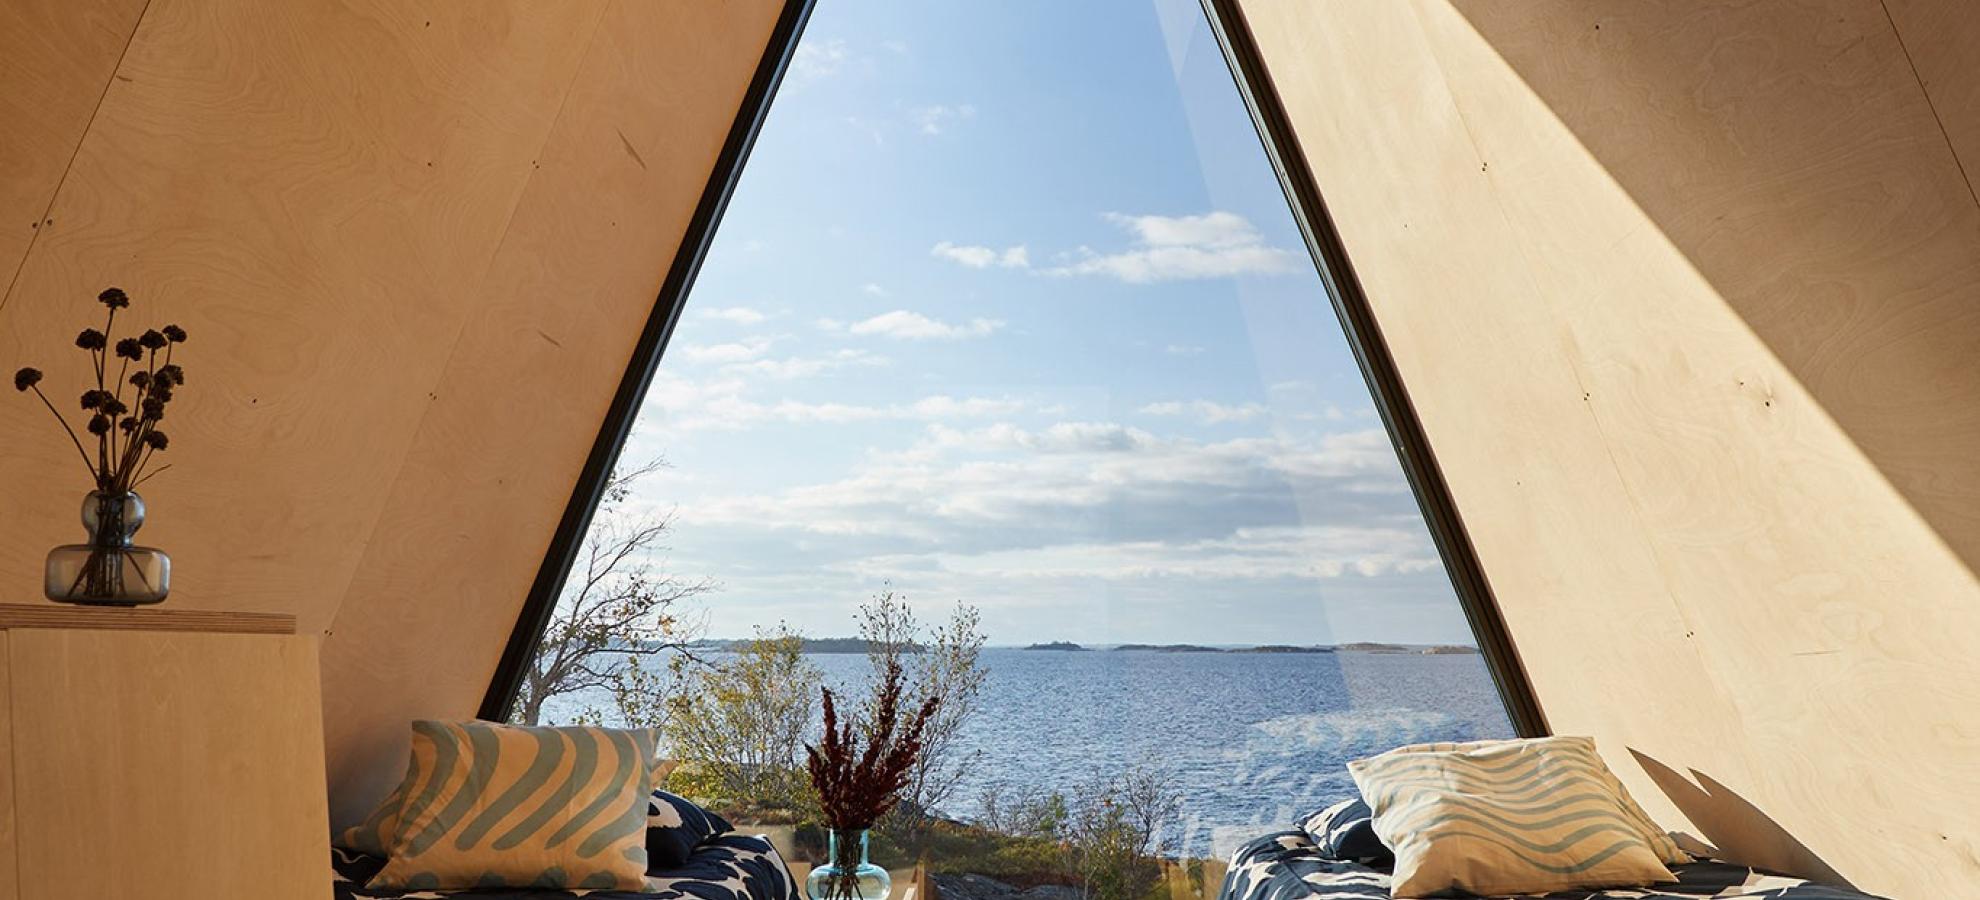 View looking out from a Nolla cabin, a wood constructed cabin that is prism shaped, with 2 single beds and a wall-sized triangular window at its end. The window overlooks a beautiful view of the sea